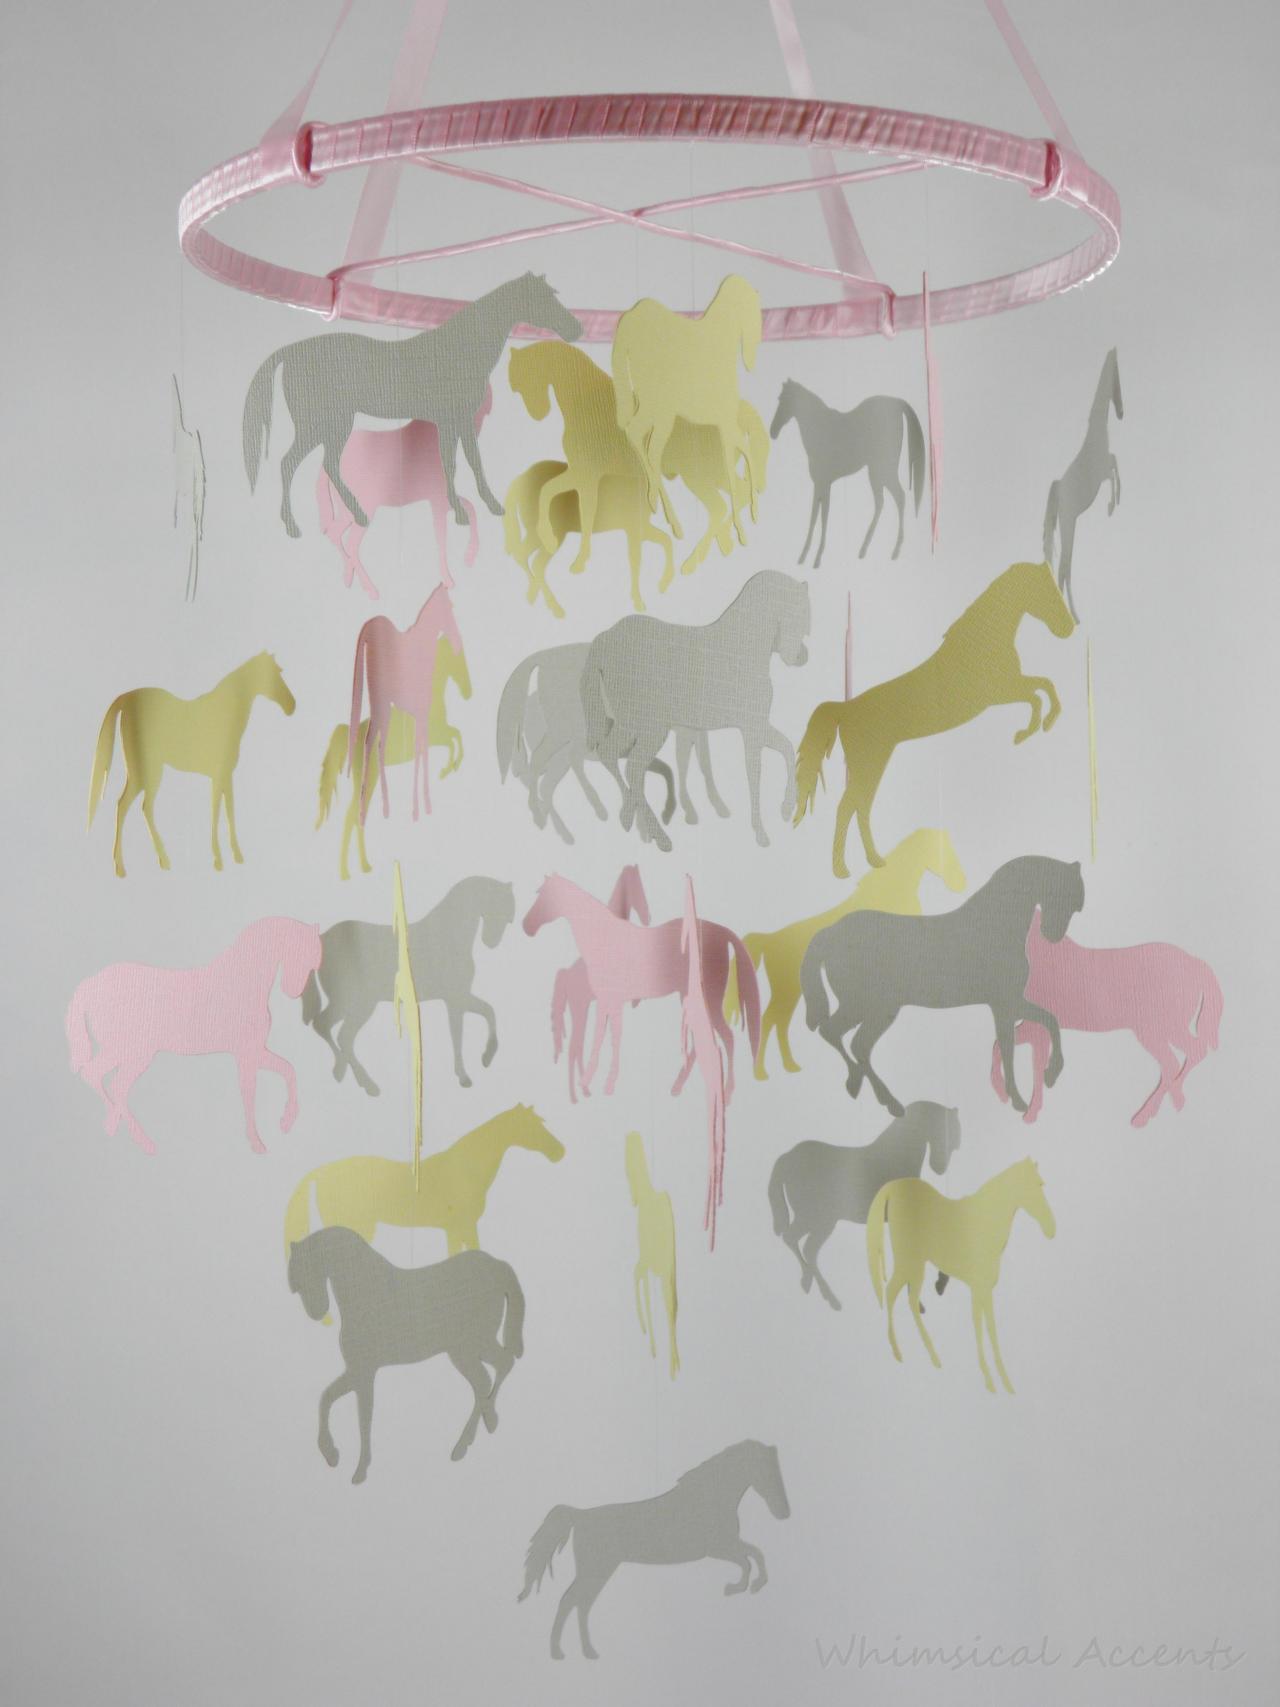 Horse Nursery Decorative Mobile In Pink, Gray And Light Yellow